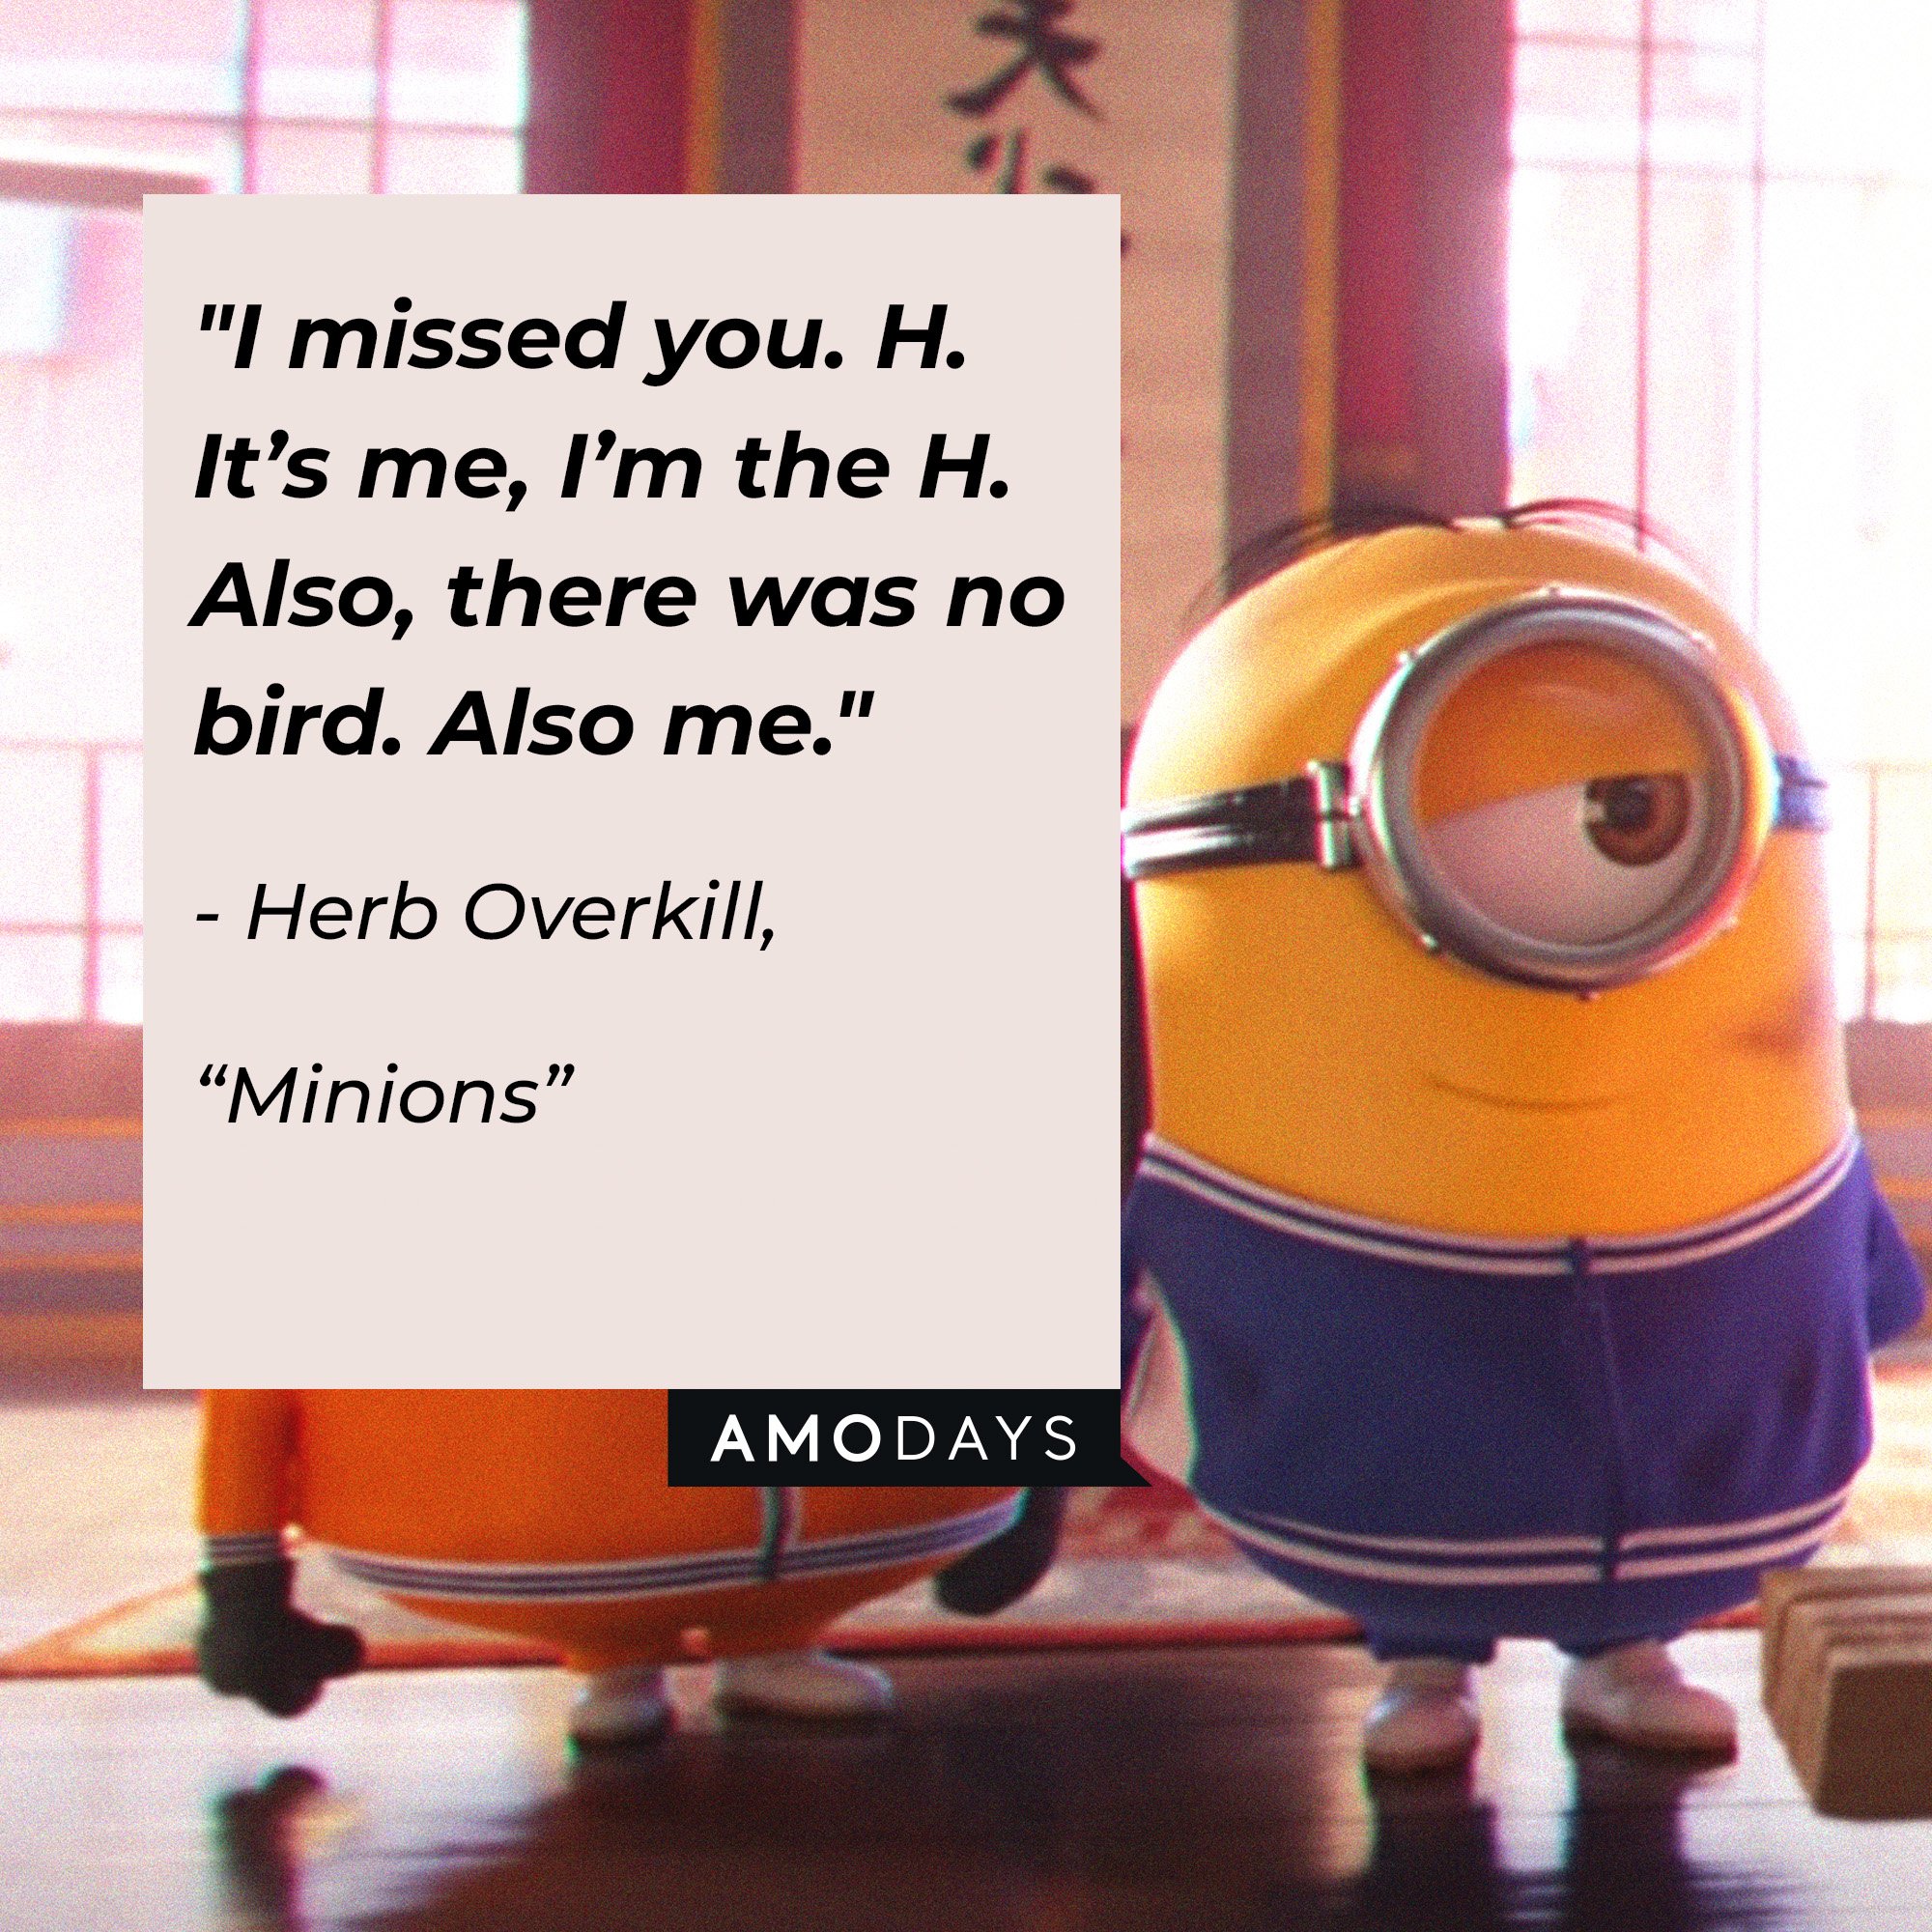 Herb Overkill's quote: "I missed you. H. It’s me, I’m the H. Also, there was no bird. Also me." | Image: AmoDays